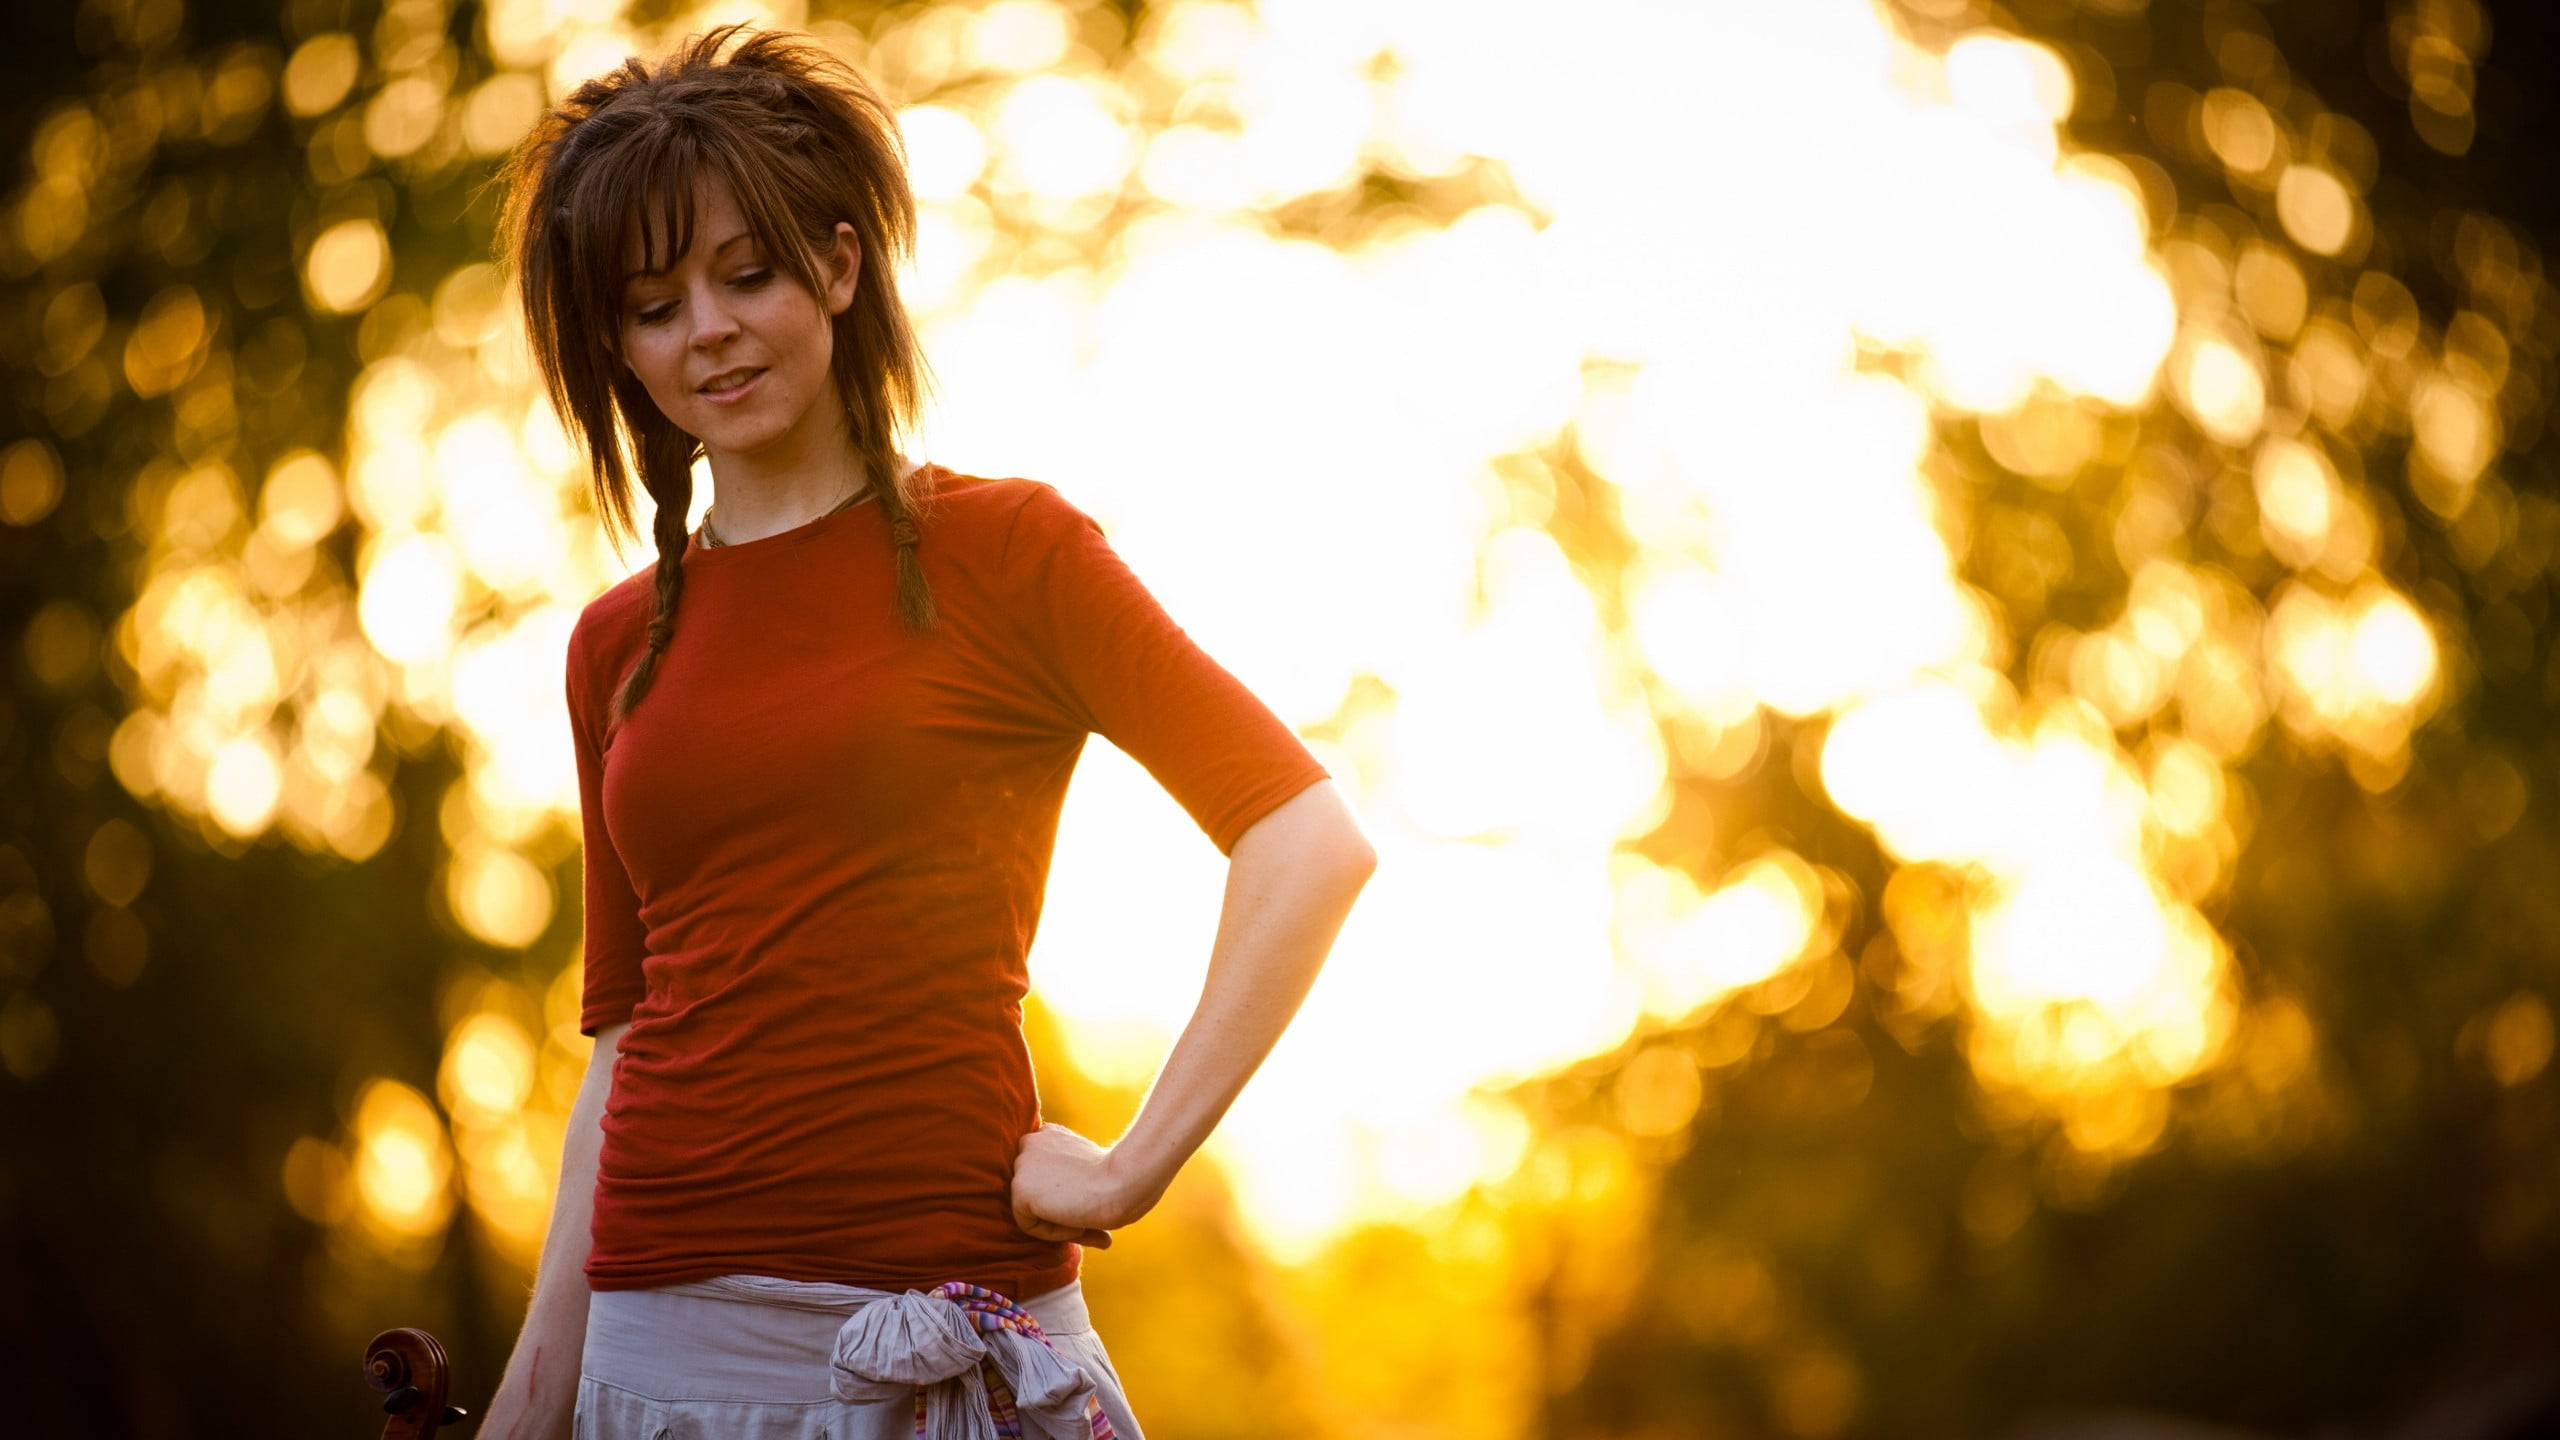 Lindsey Stirling, women, musician, violin, hands on hips, one person